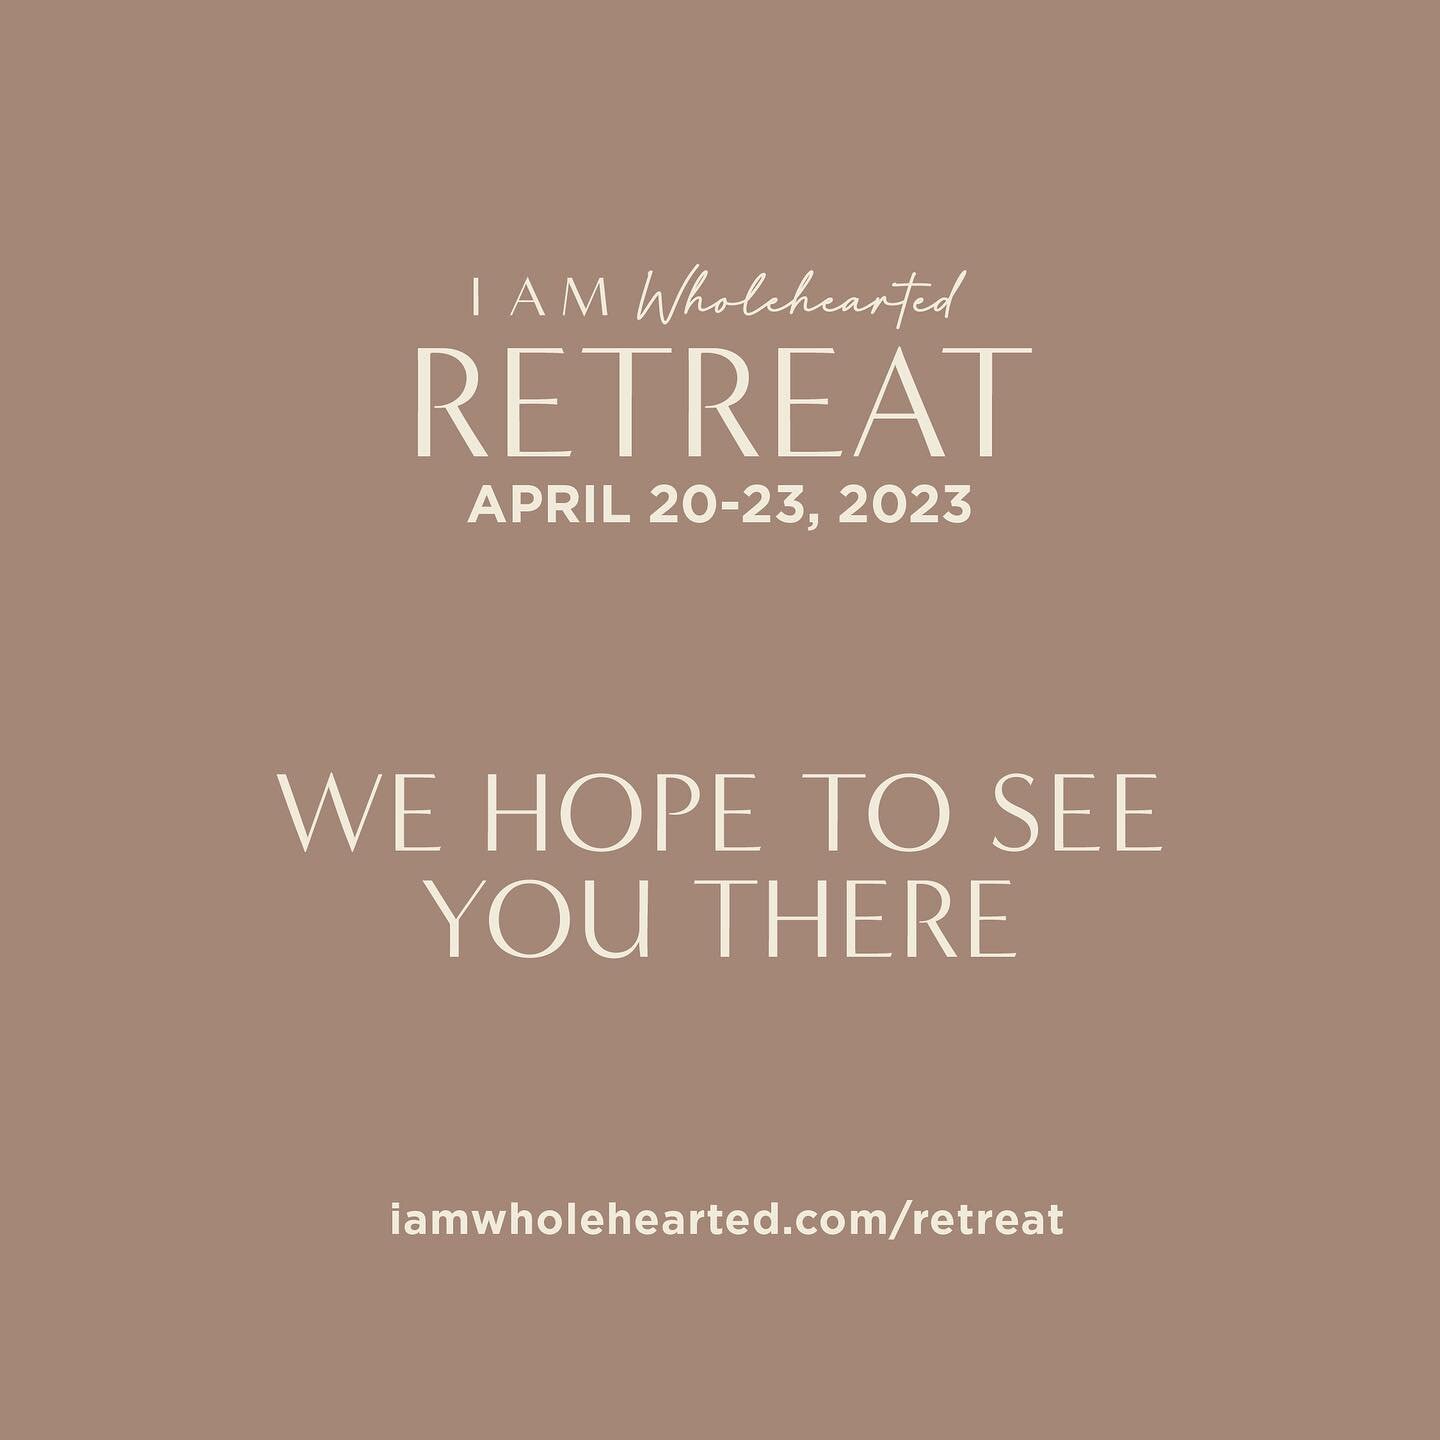 Today is the last chance to register for the I Am Wholehearted Retreat. Show up whole and complete in every area of your life. Link in bio.

&bull;
&bull;
&bull;
&bull;
&bull;

#IAmWholehearted #wholehearted #healingjourney #IAmWholeheartedretreat202